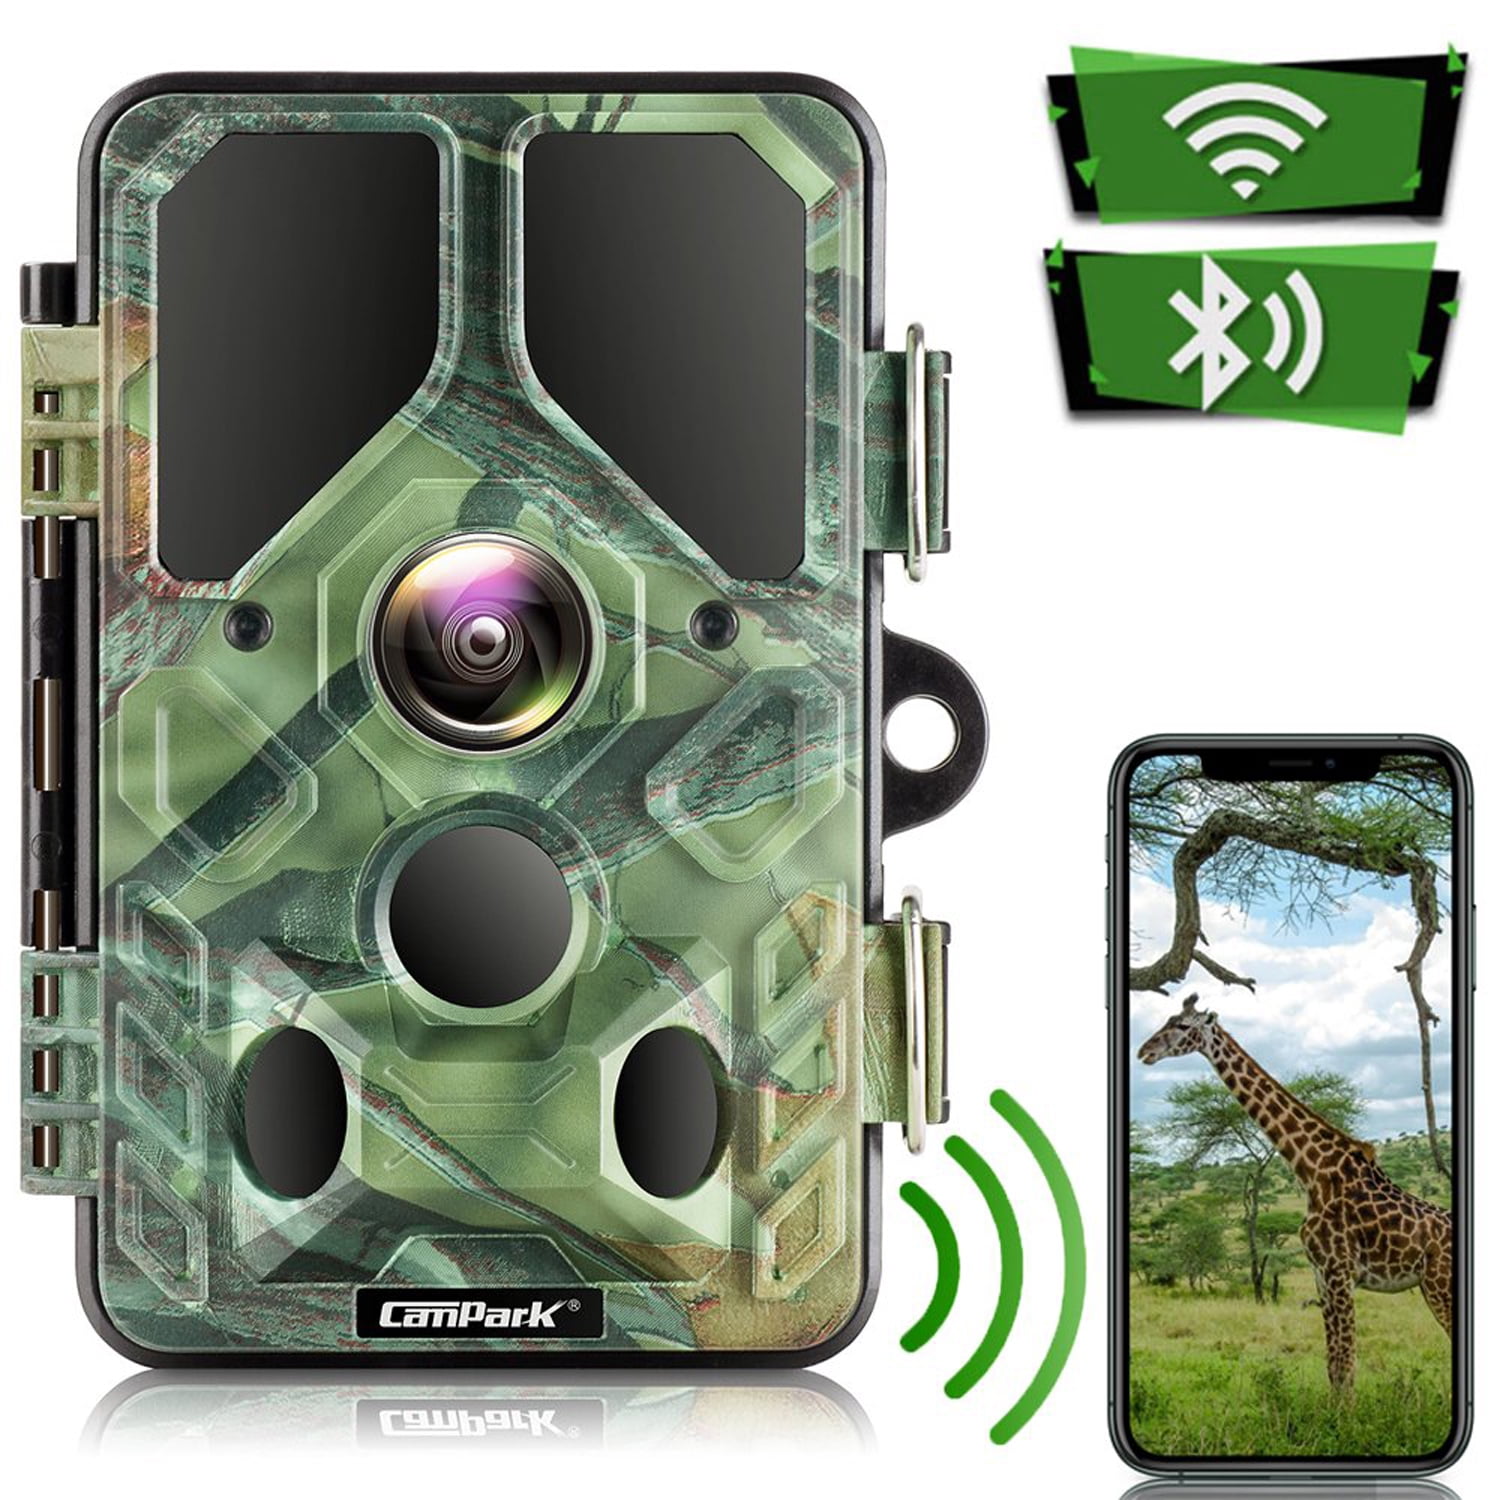 Victure HC 400 Trail Game Camera Waterproof IP66 w/ Night Vision 20MP 1080P NEW 